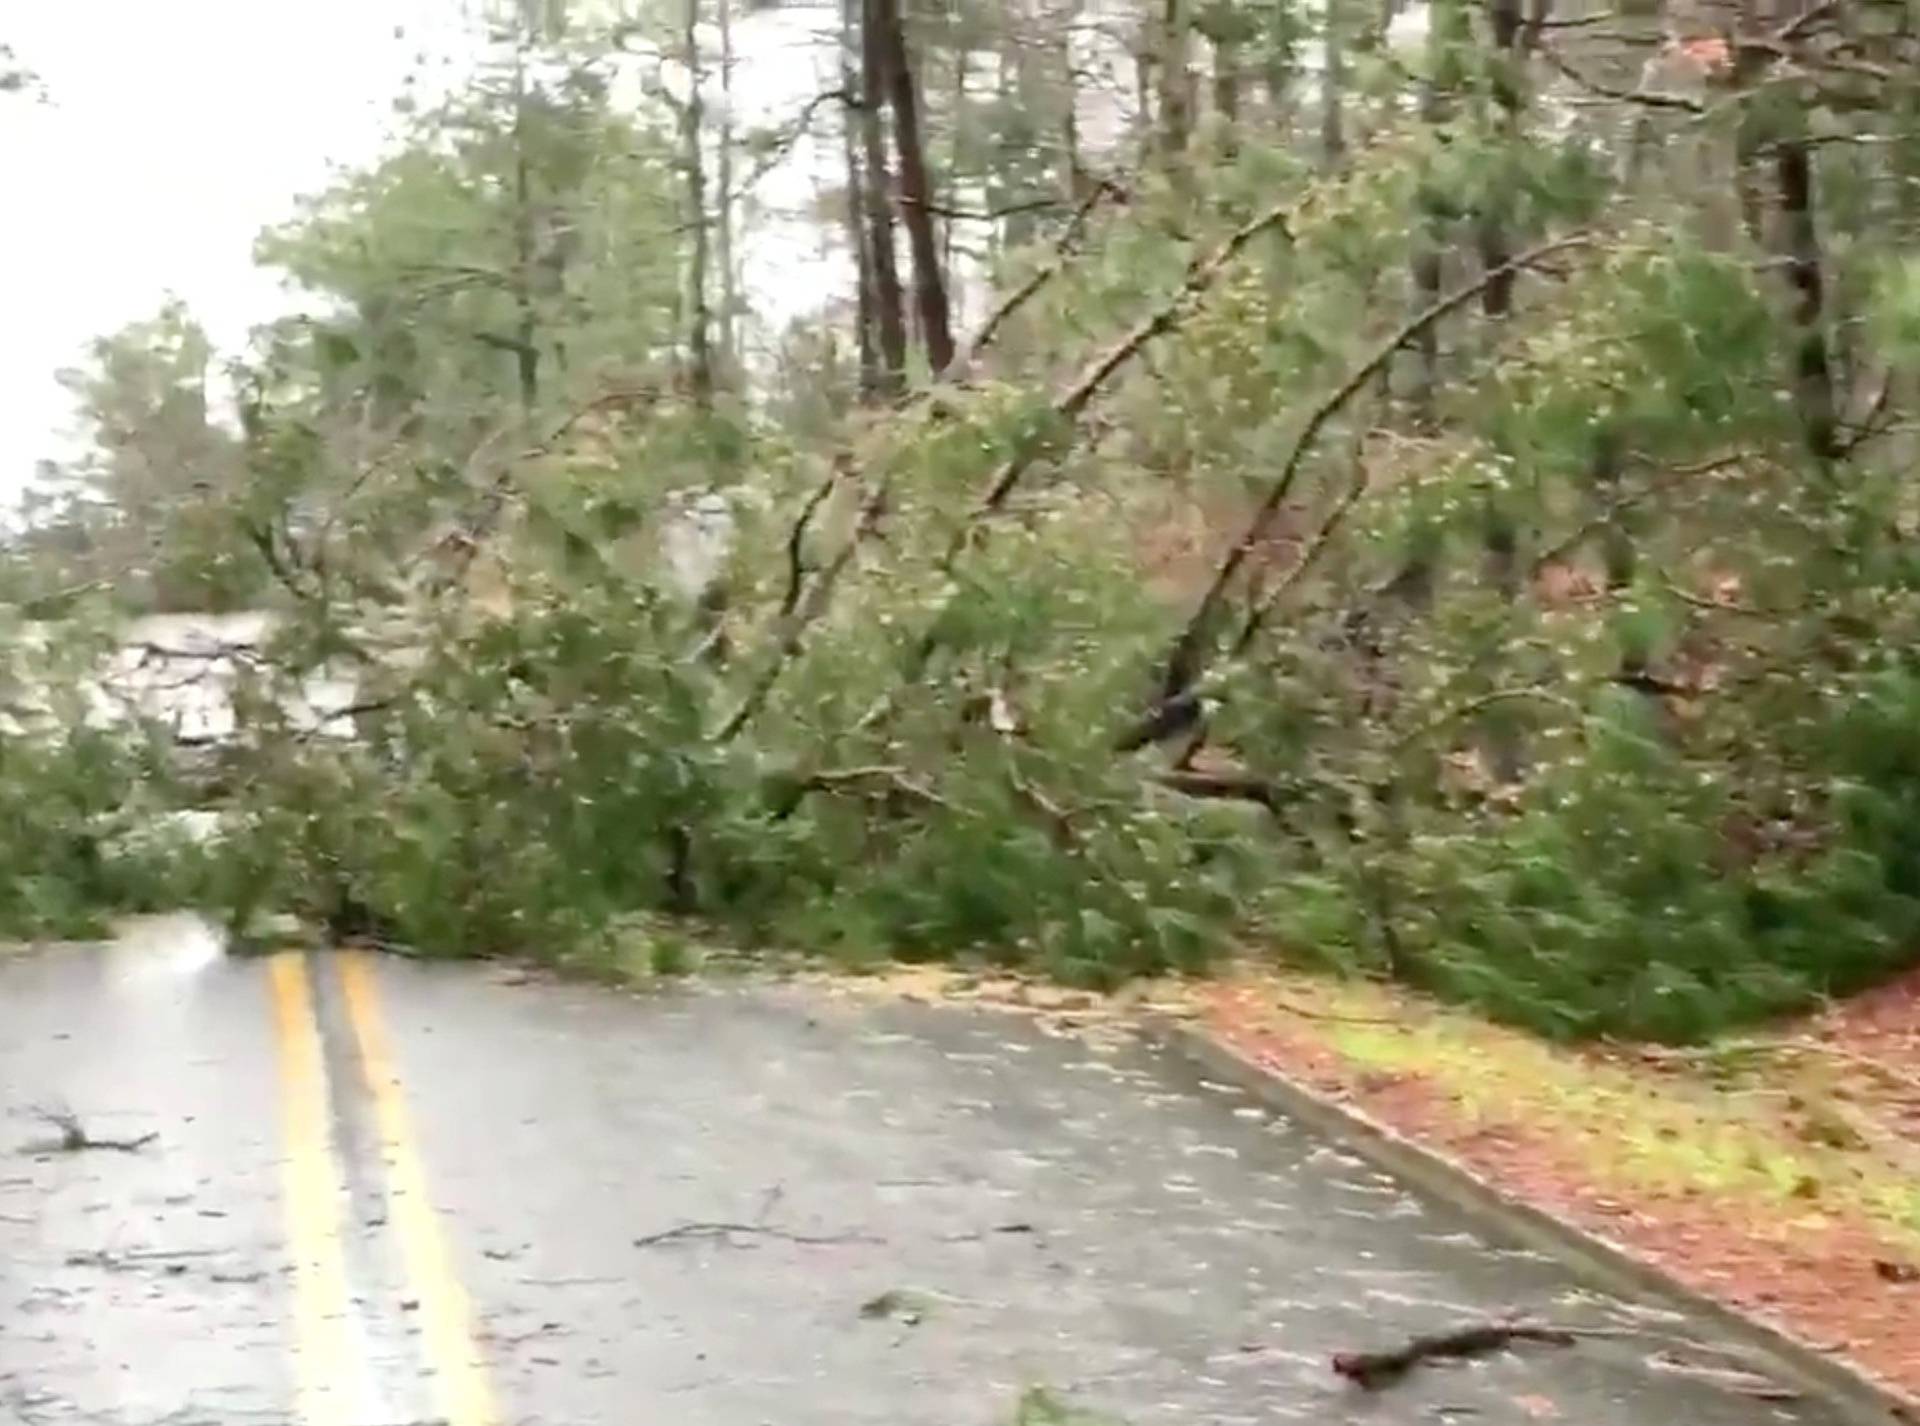 Fallen trees lie across a road following a tornado in Beauregard, Alabama, U.S. in this March 3, 2019 still image obtained from social media video